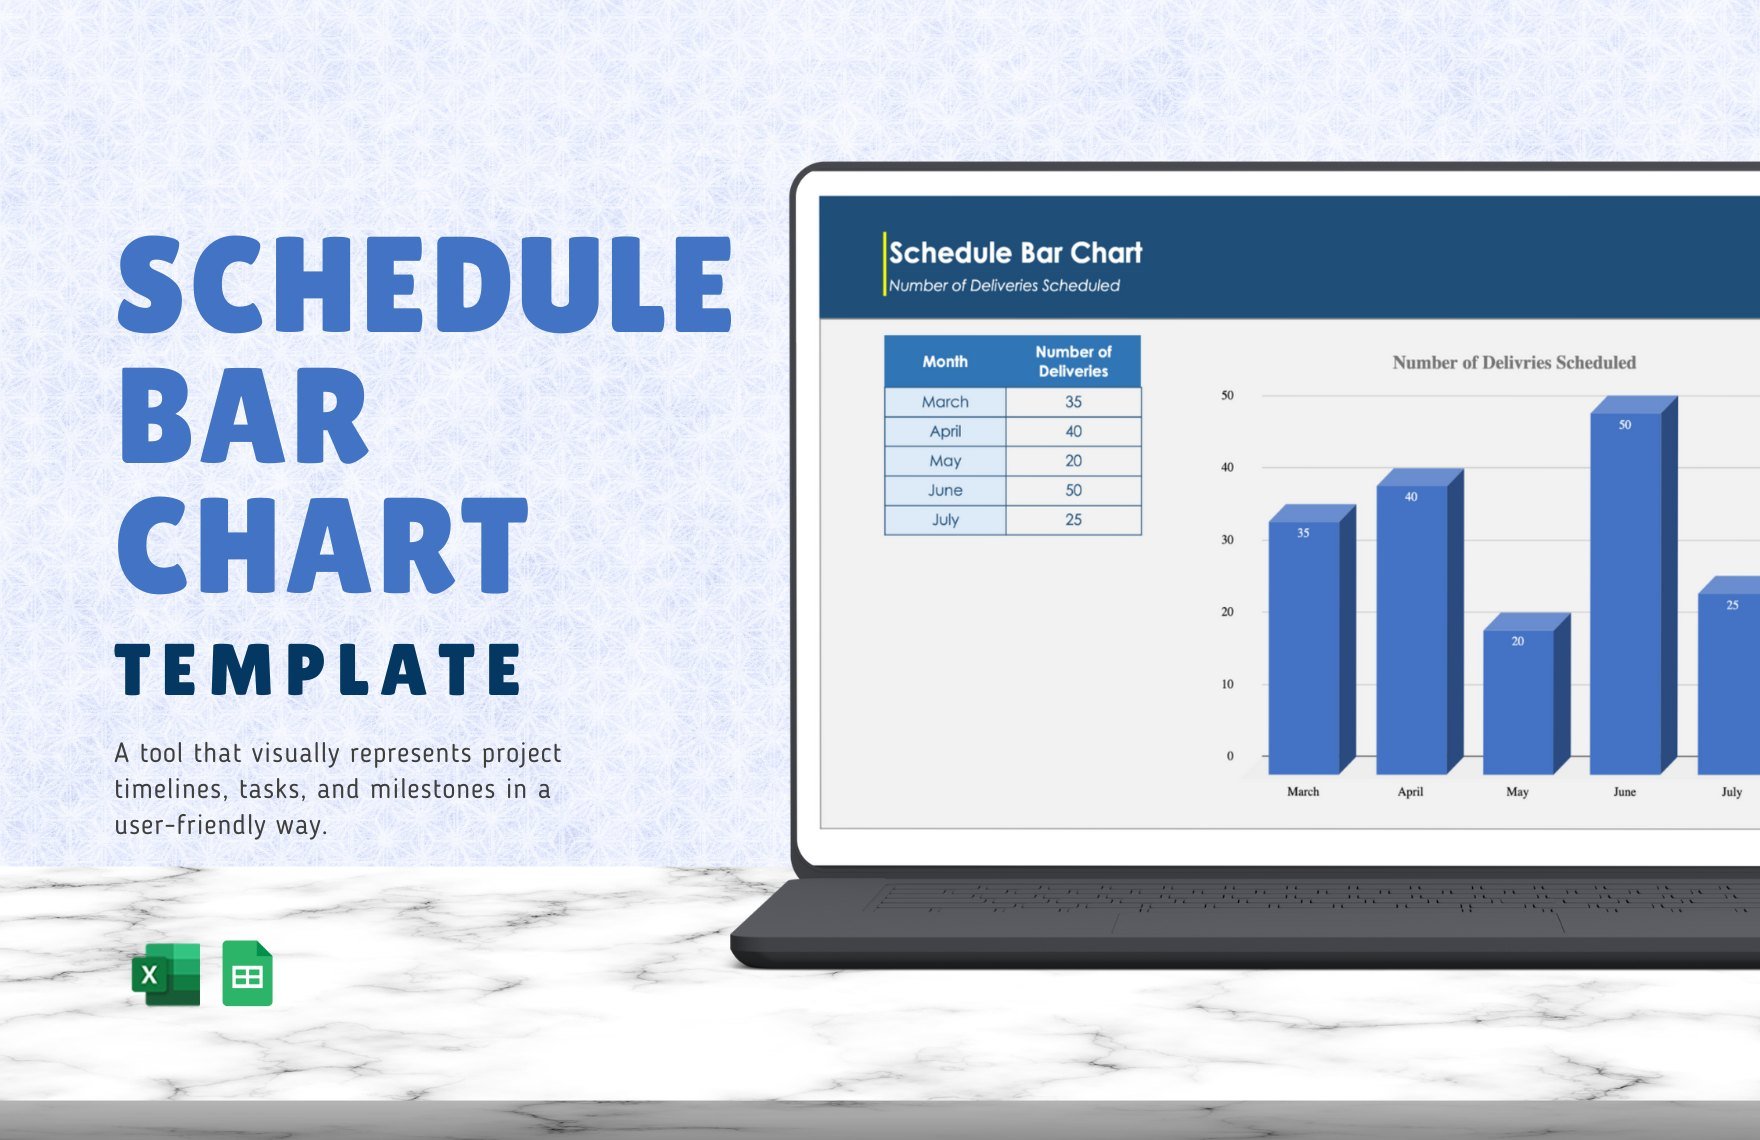 Schedule Bar Chart Template in Excel, Google Sheets